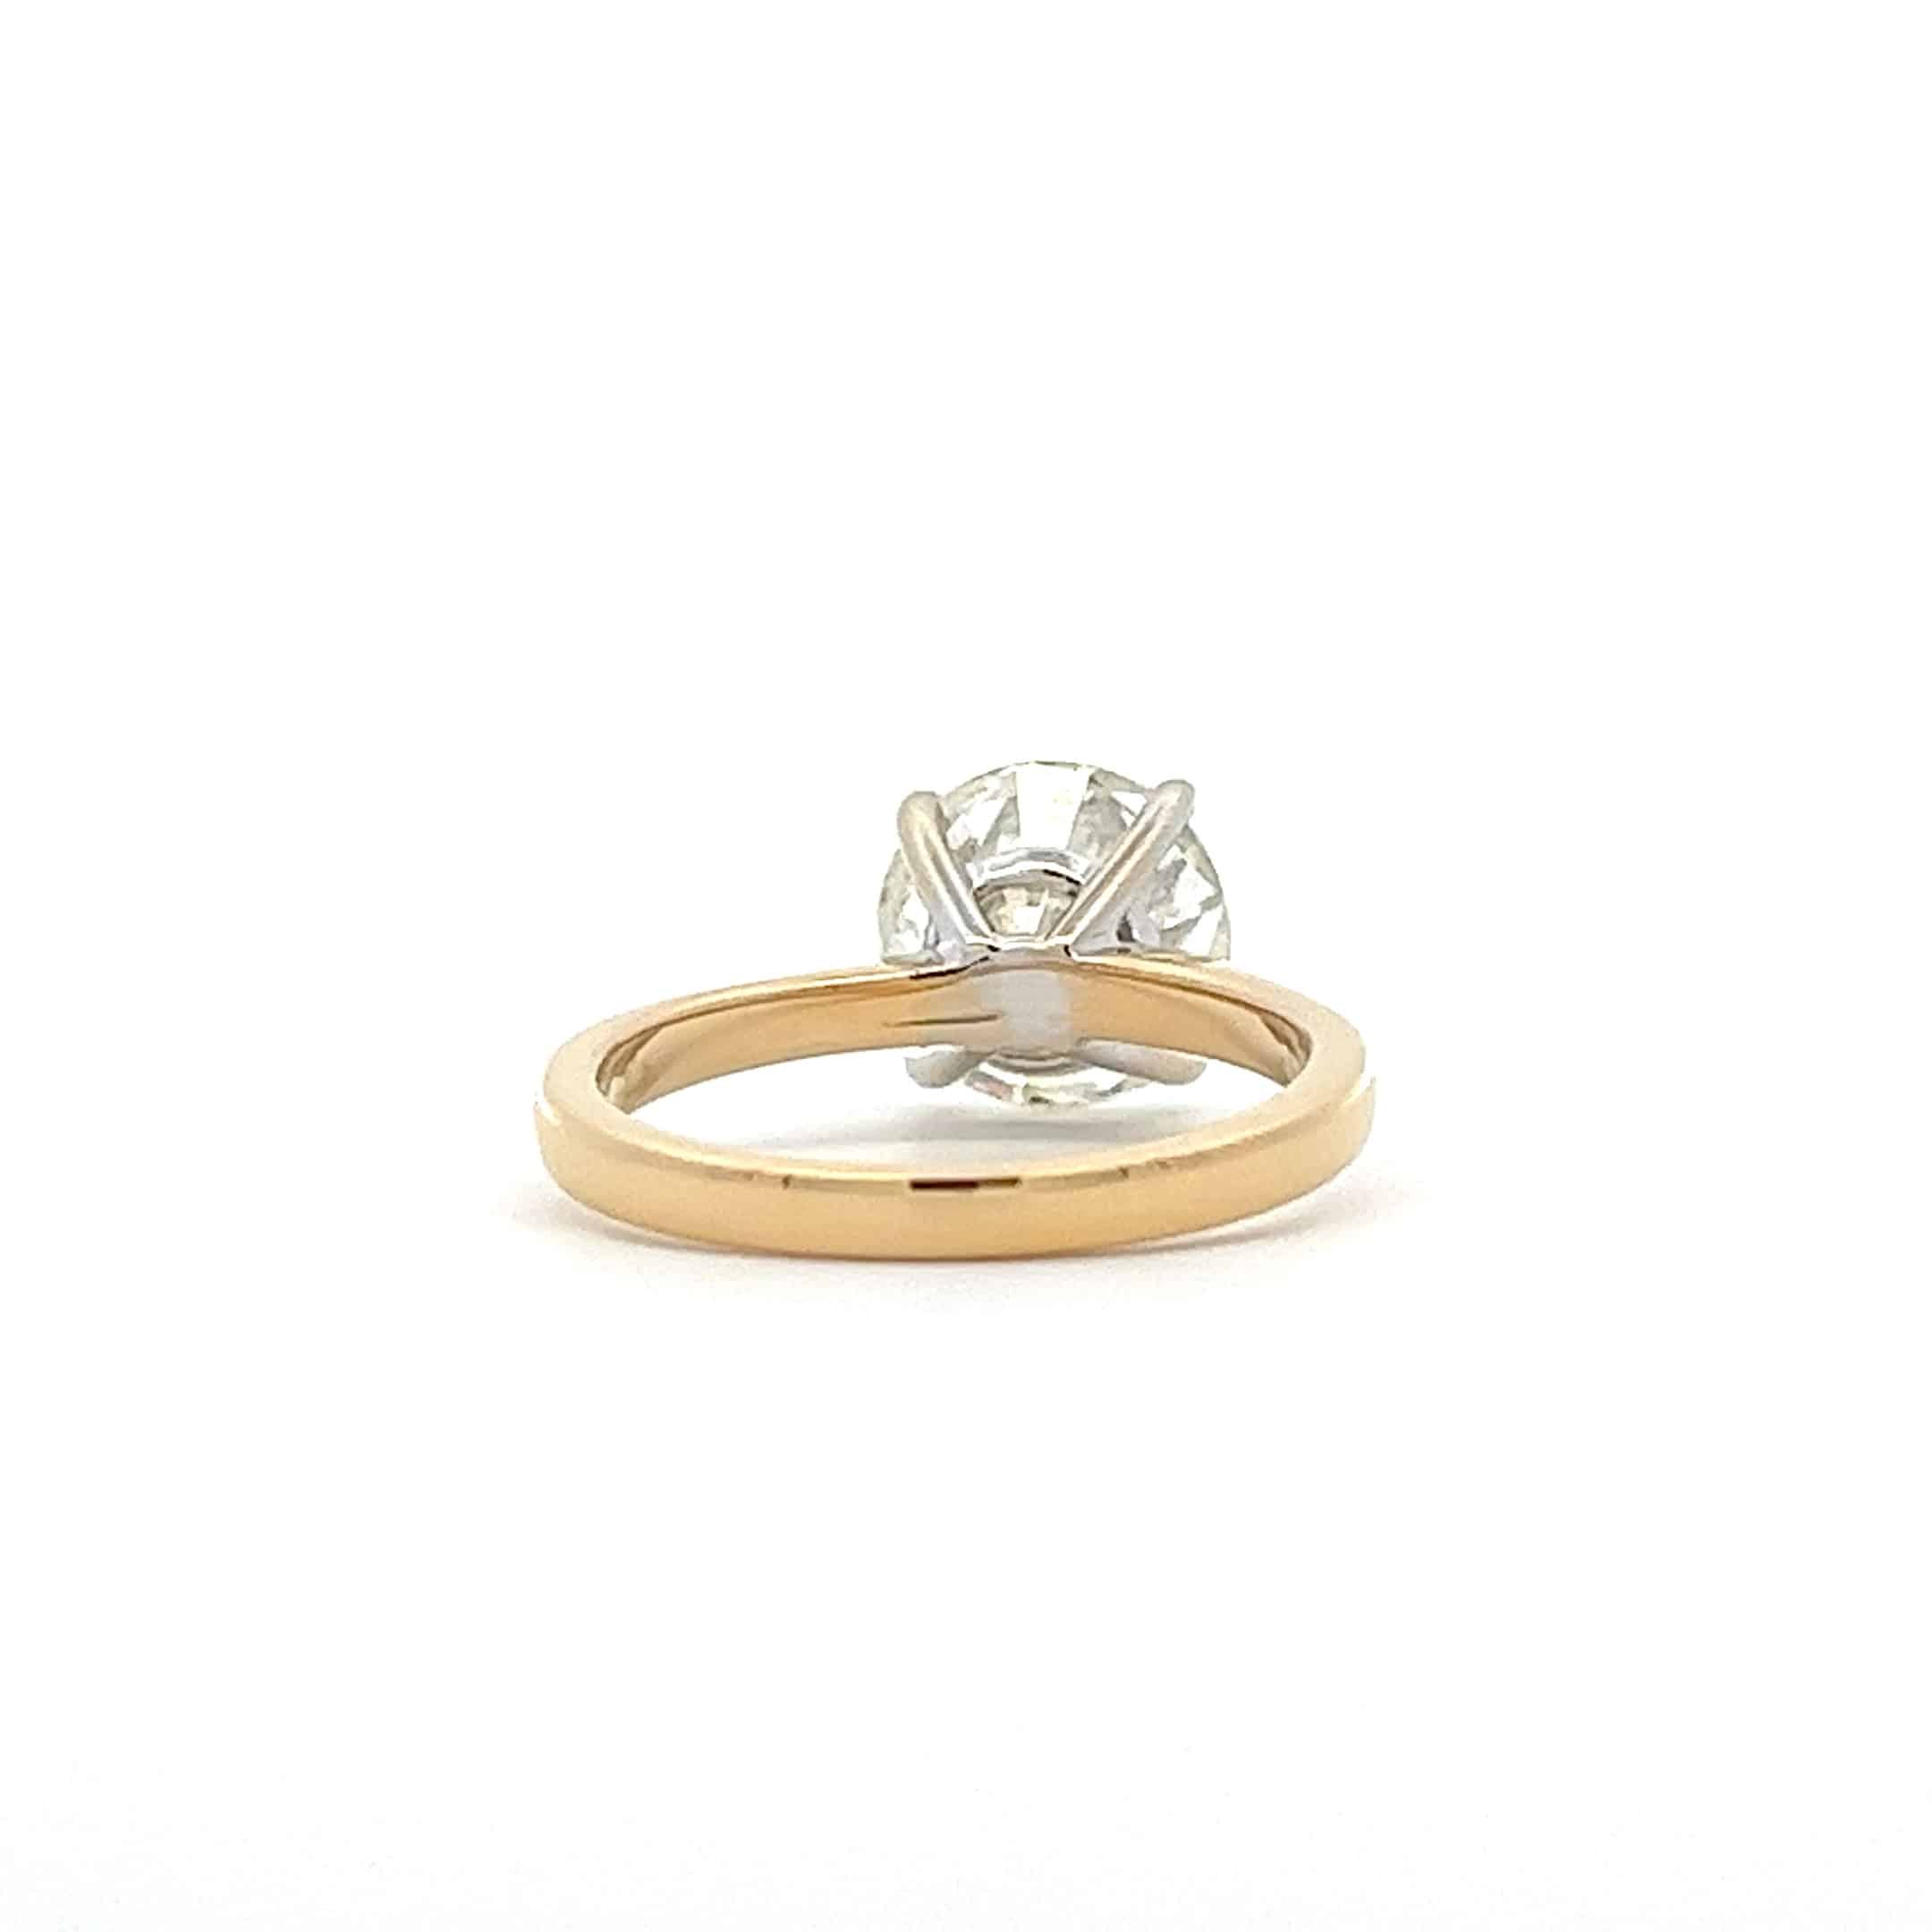 3.00ct Brilliant Cut Diamond Set in an 18ct Yellow and White Gold Ring – Pre-Owned